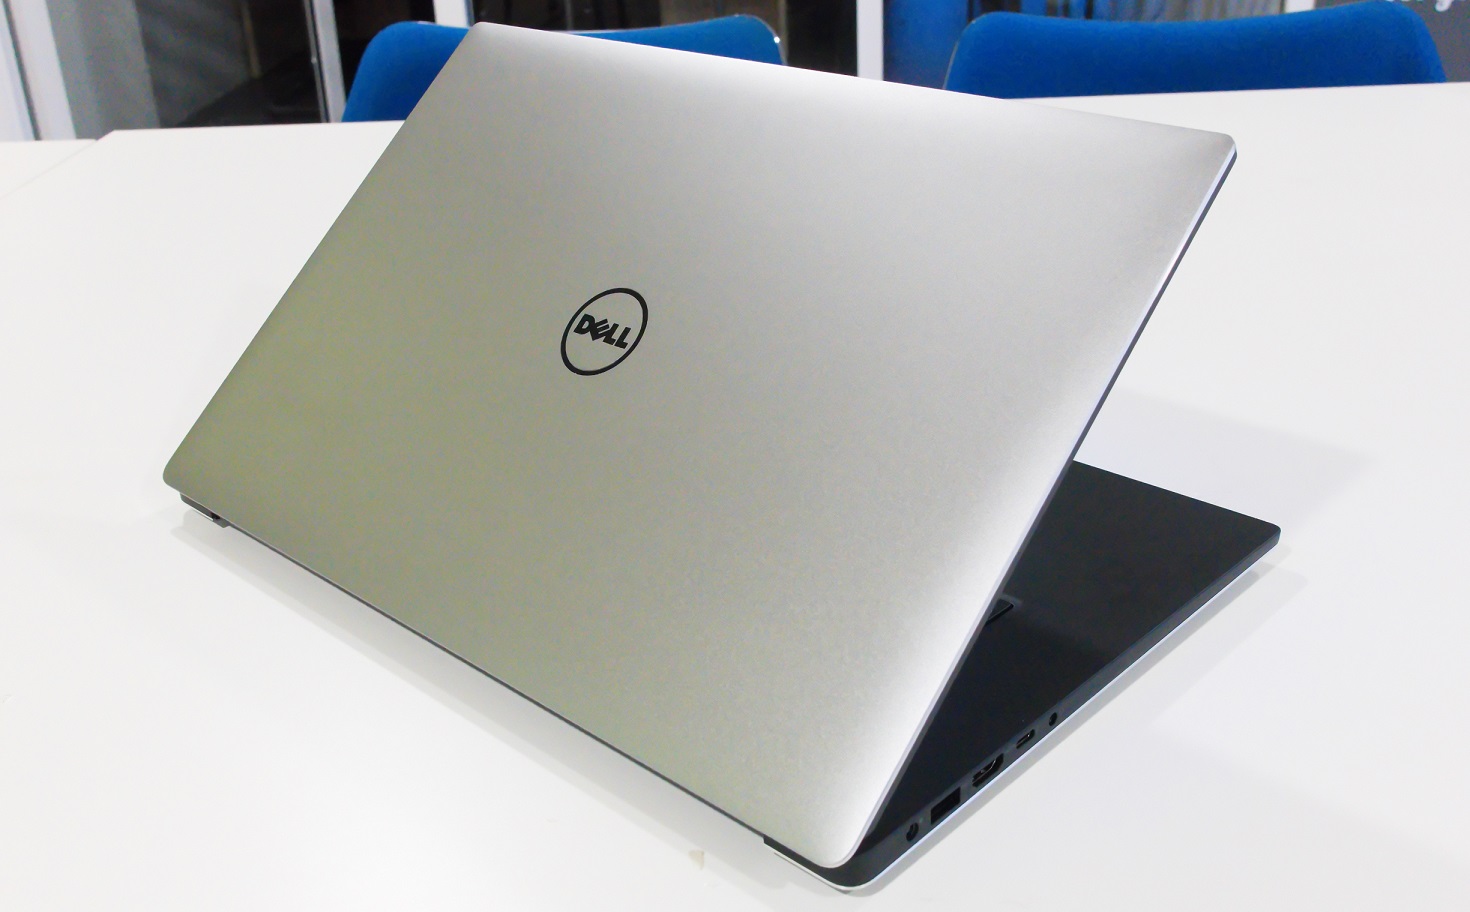 Dell XPS 15 combines beauty and performance in one sleek package